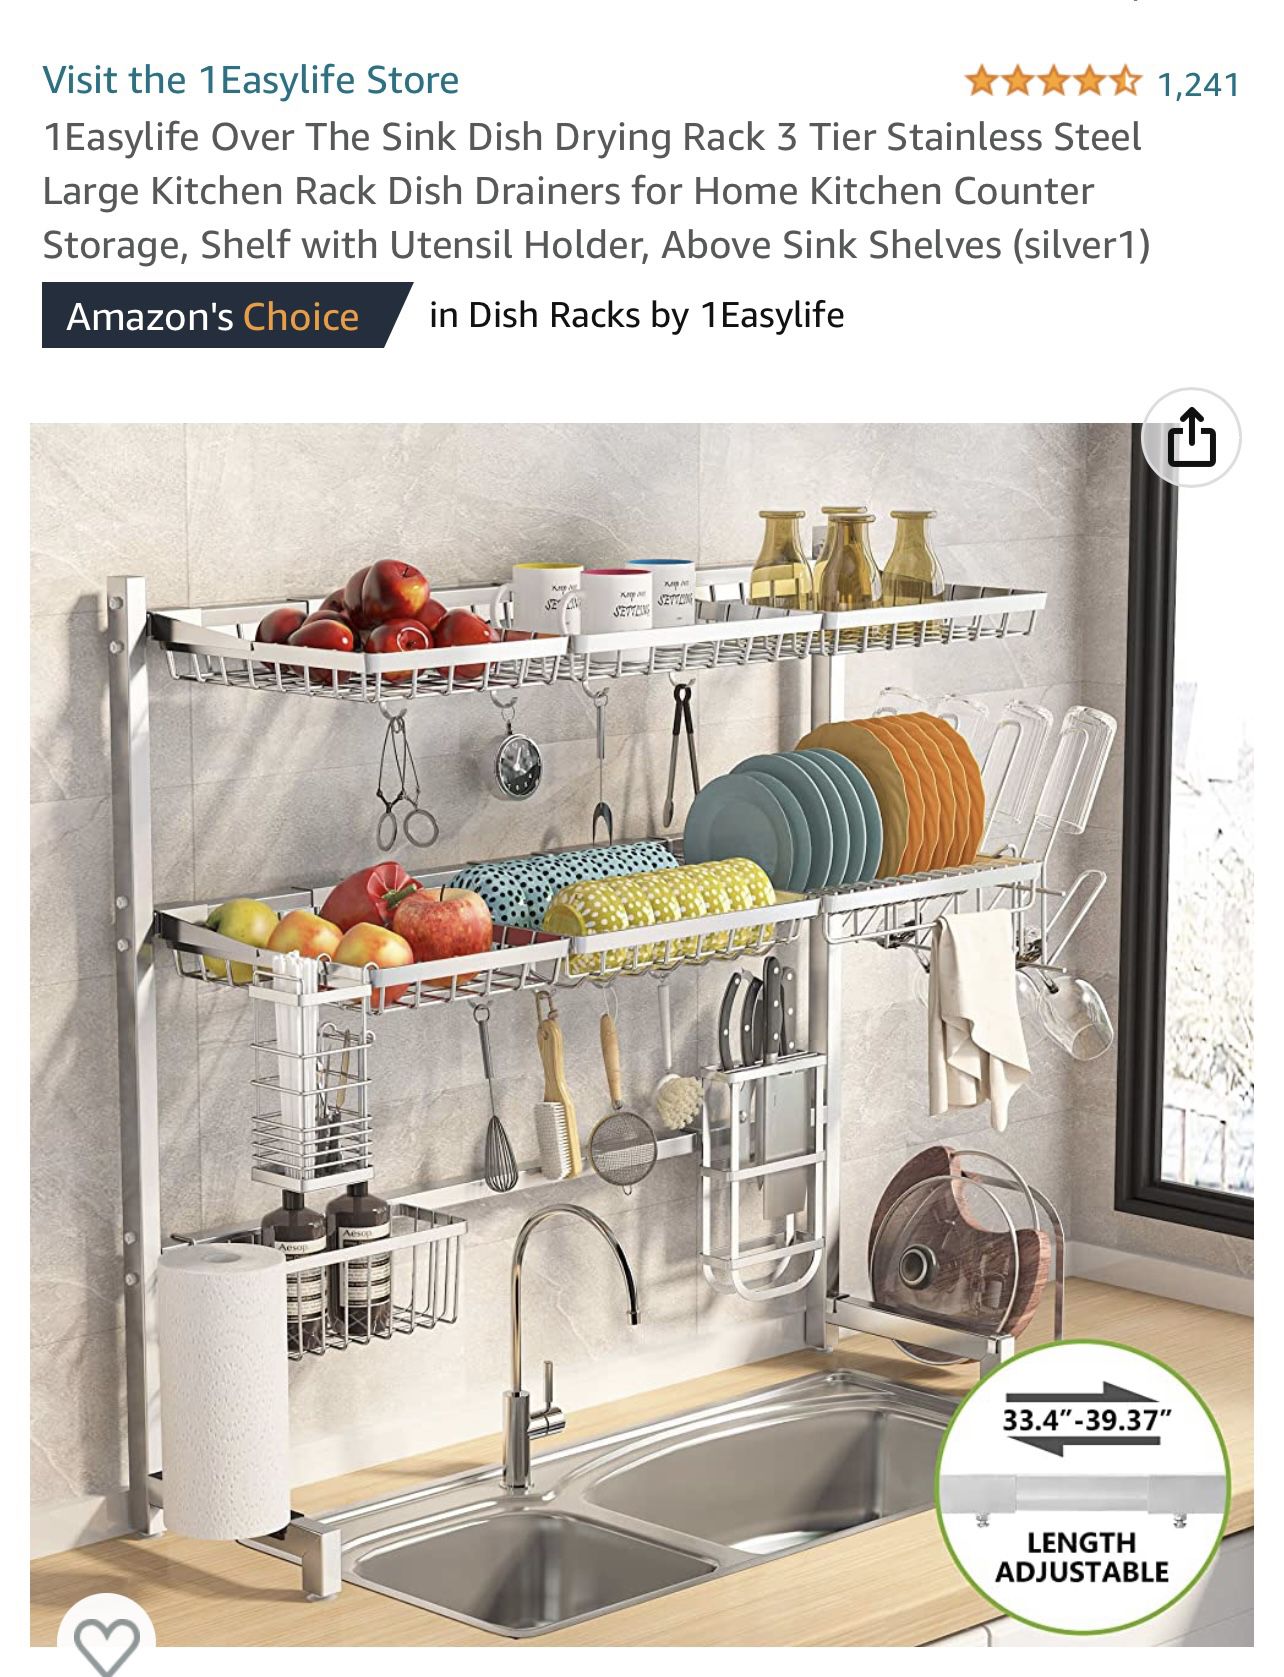 Stainless Steel Large Kitchen Rack Dish Drainers for Home Kitchen Counter  Storage, Shelf for Sale in Auburn, WA - OfferUp